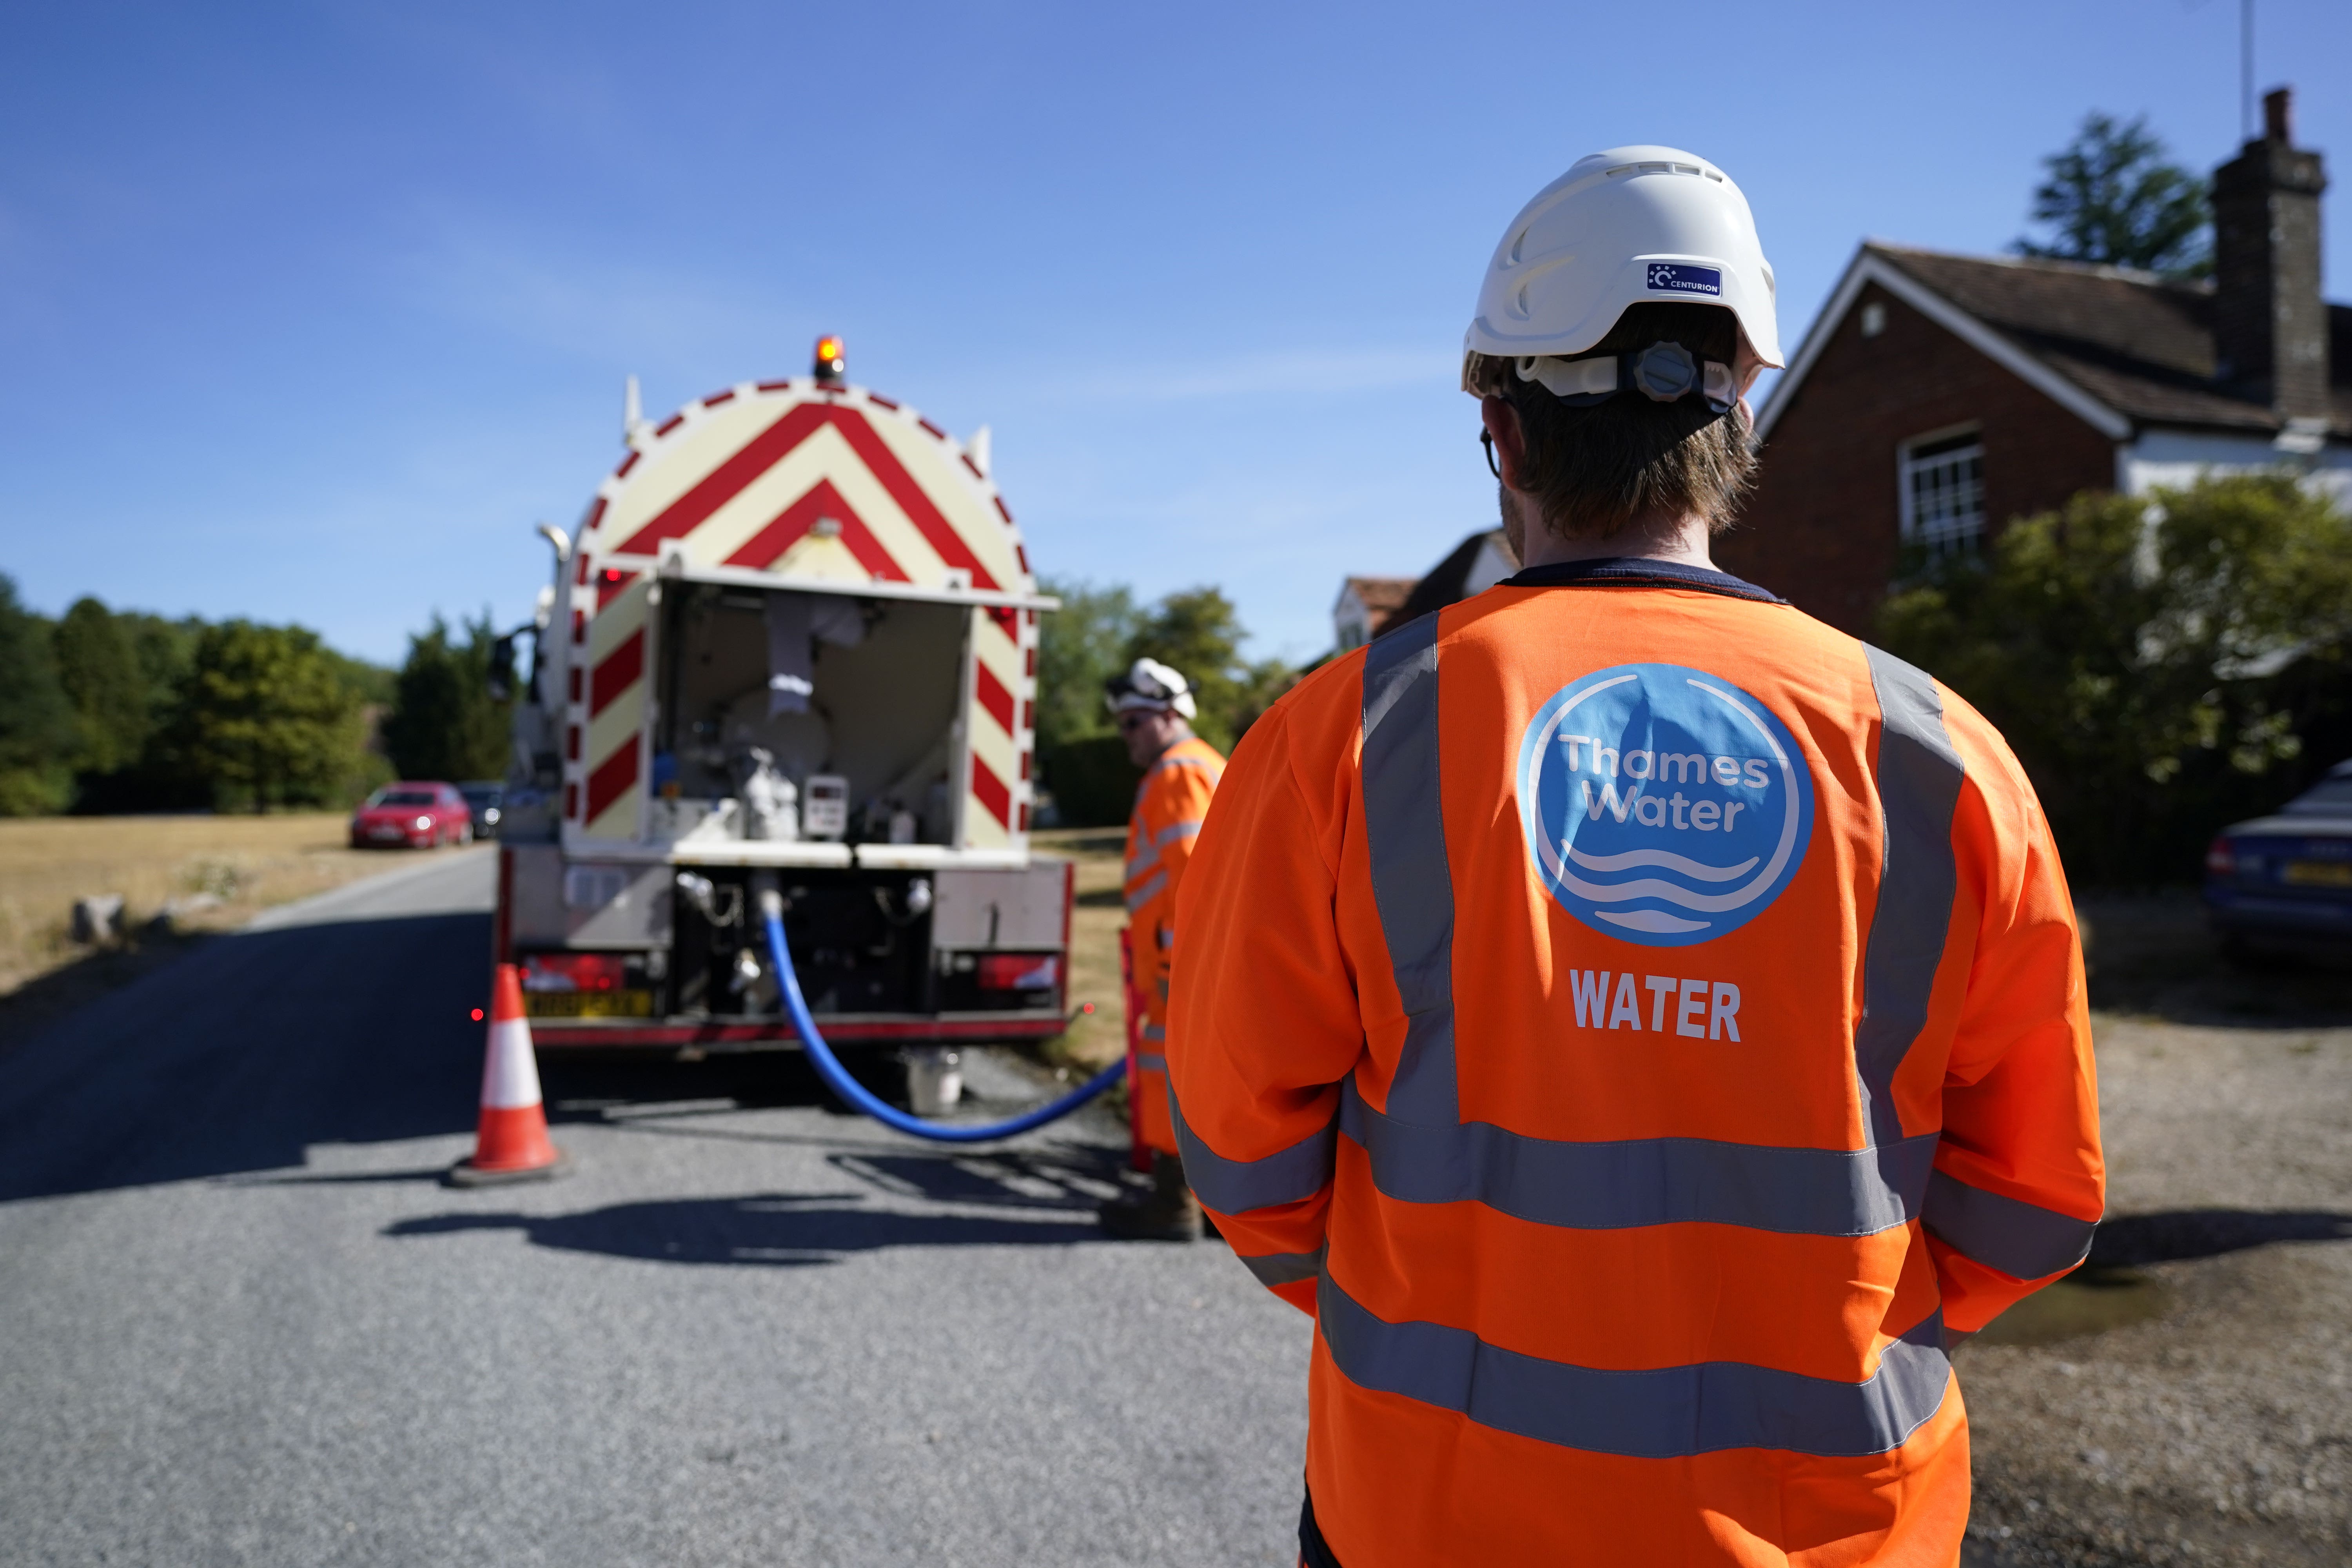 The water regulator has said it has been clear about Thames Water’s ‘significant issues’ (Andrew Matthews/PA)